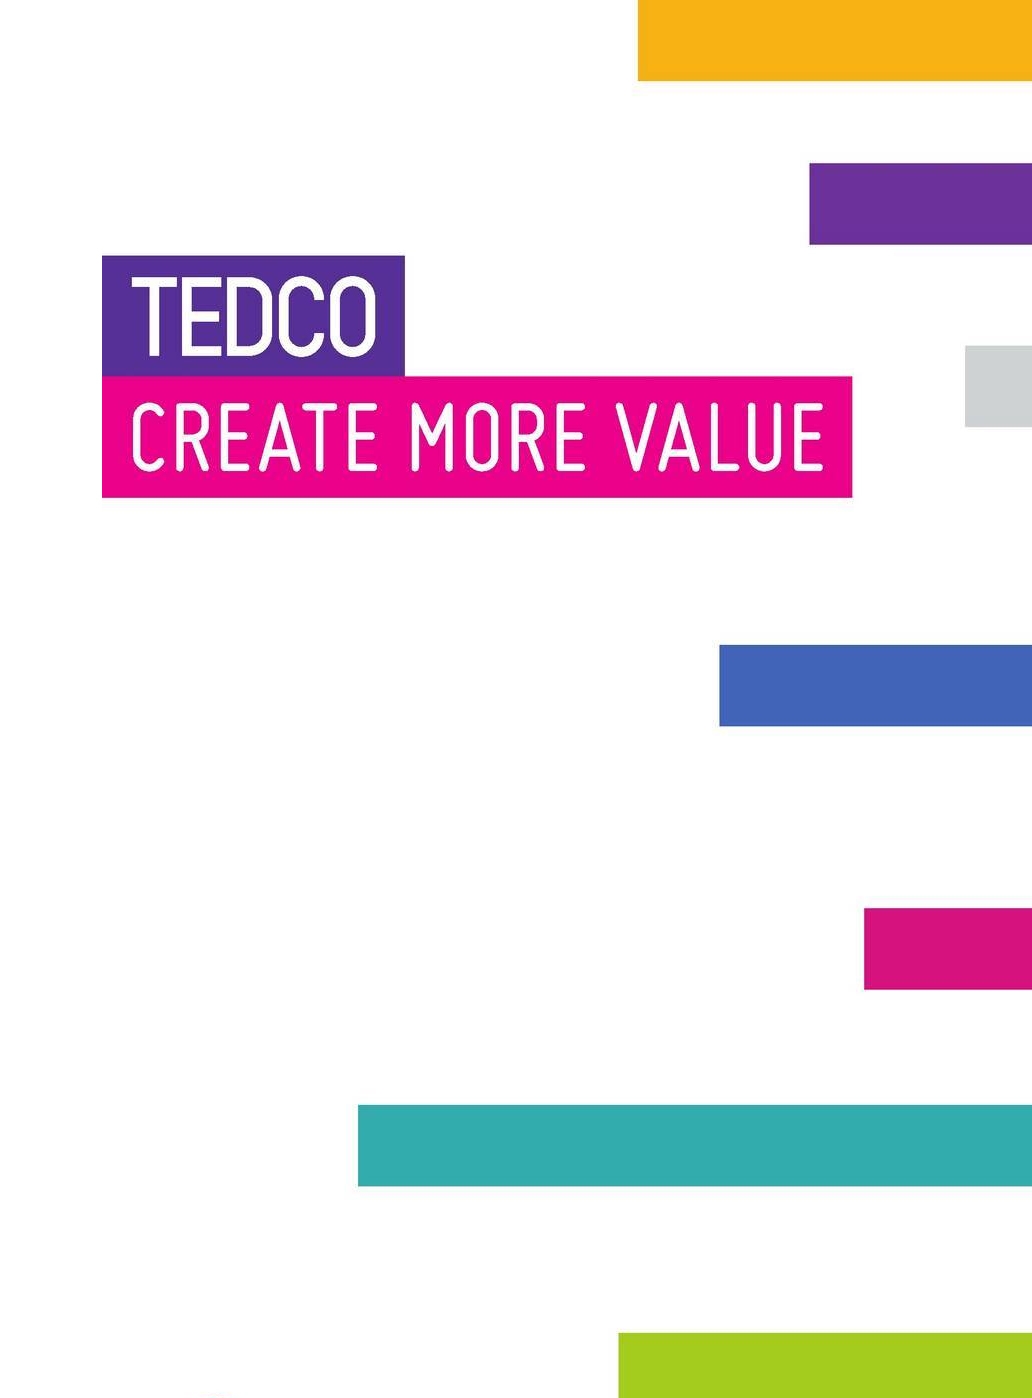 TEDCO Brand Guidelines